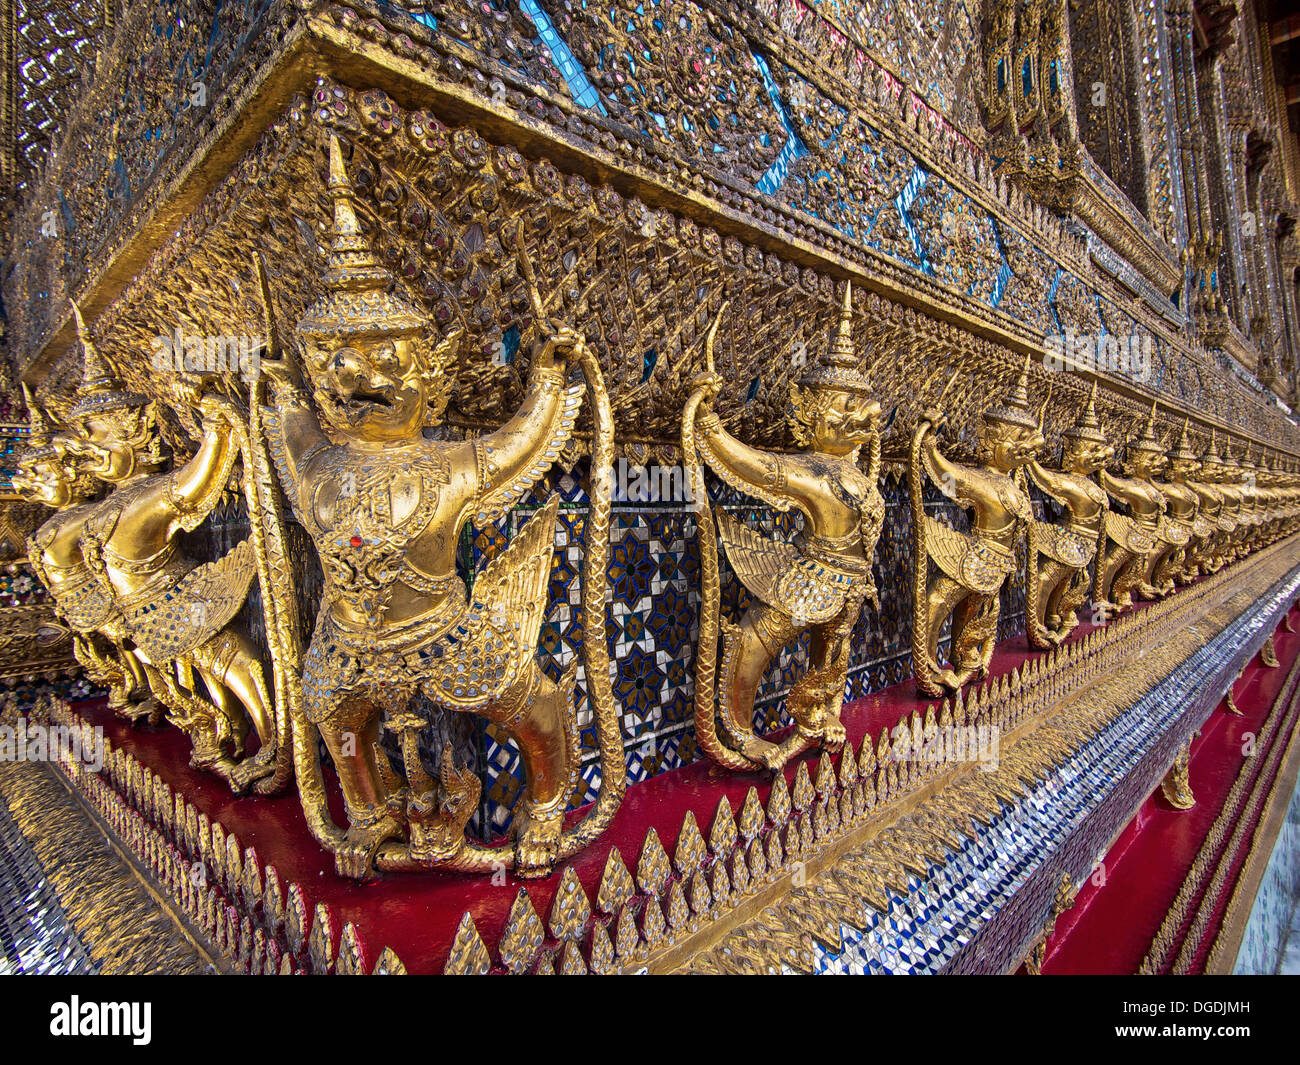 Guardian statues surrounding the Temple of the Emerald Buddha in Bangkok, Thailand. Stock Photo